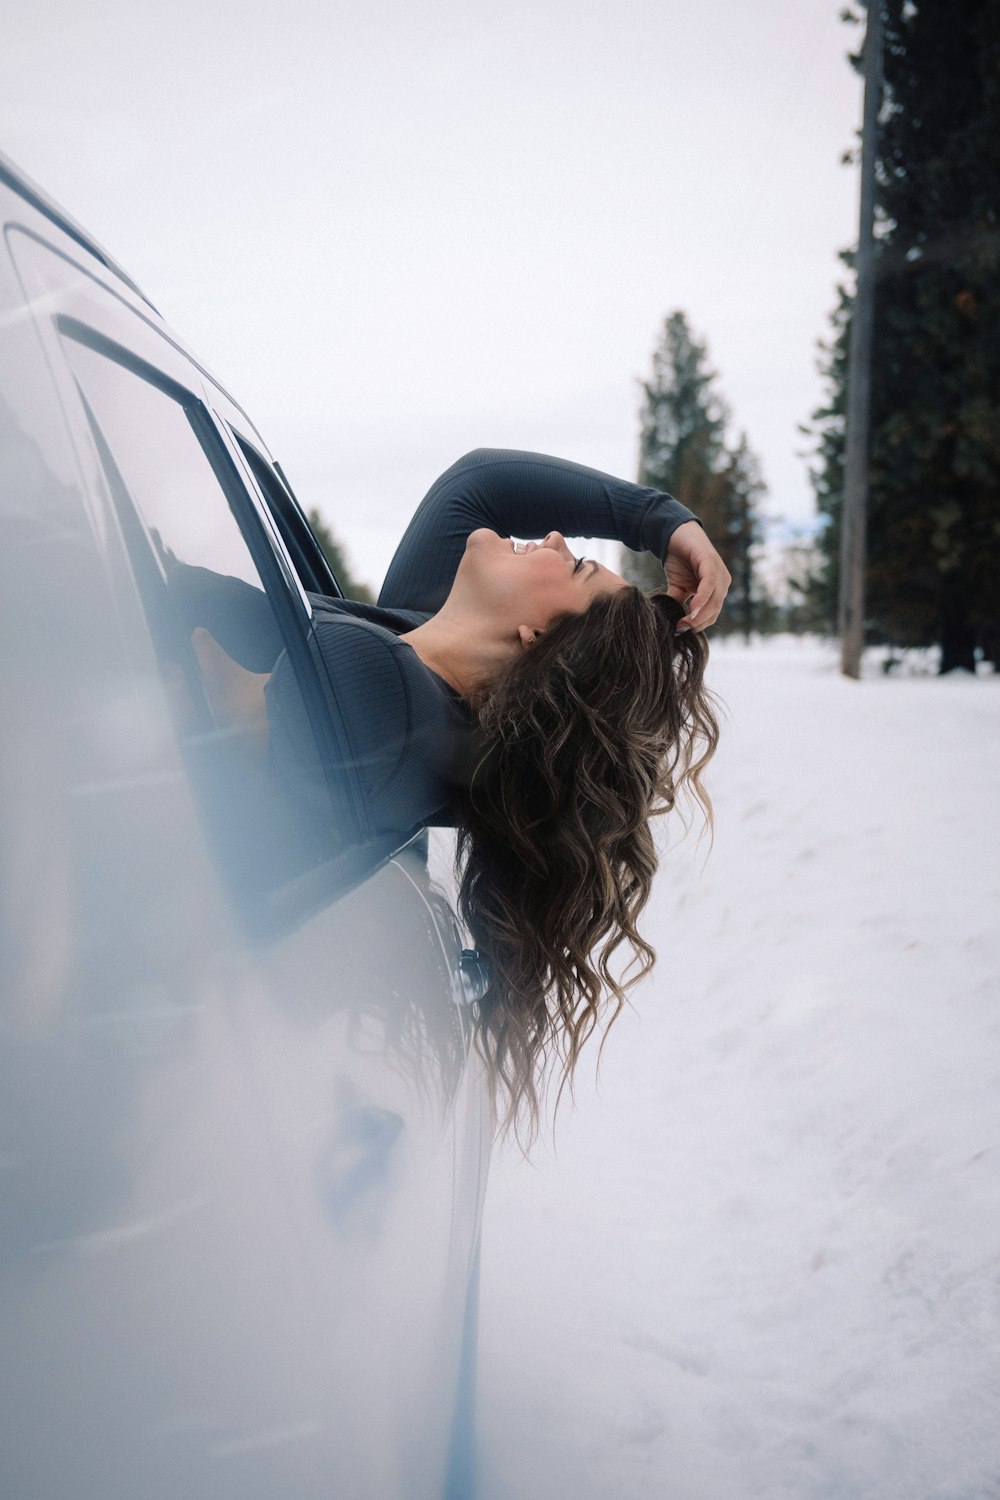 a woman leaning out of a car window in the snow